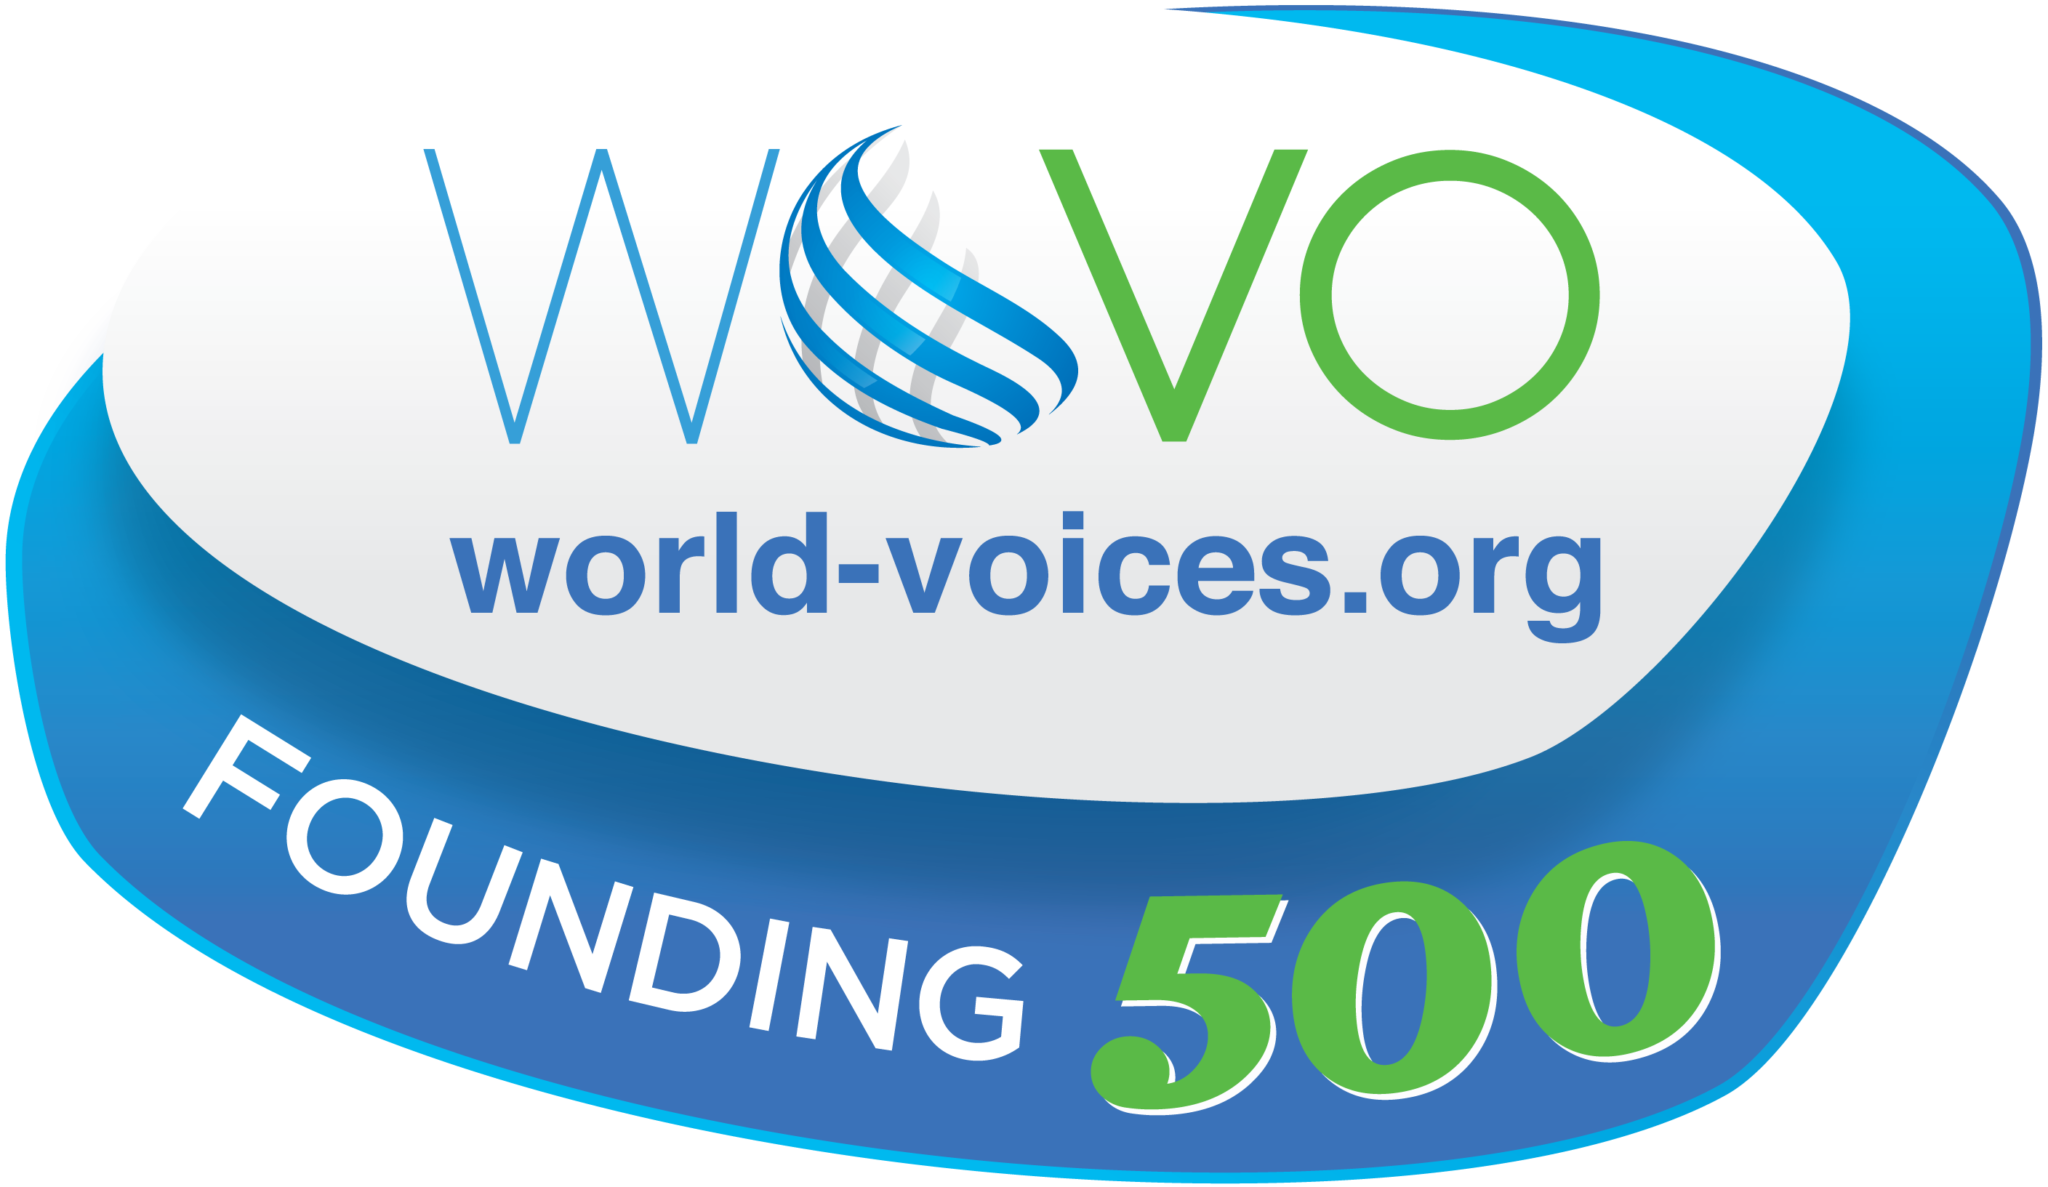 Bobbin Beam is a Founding 500 Member of WorldVoices.org